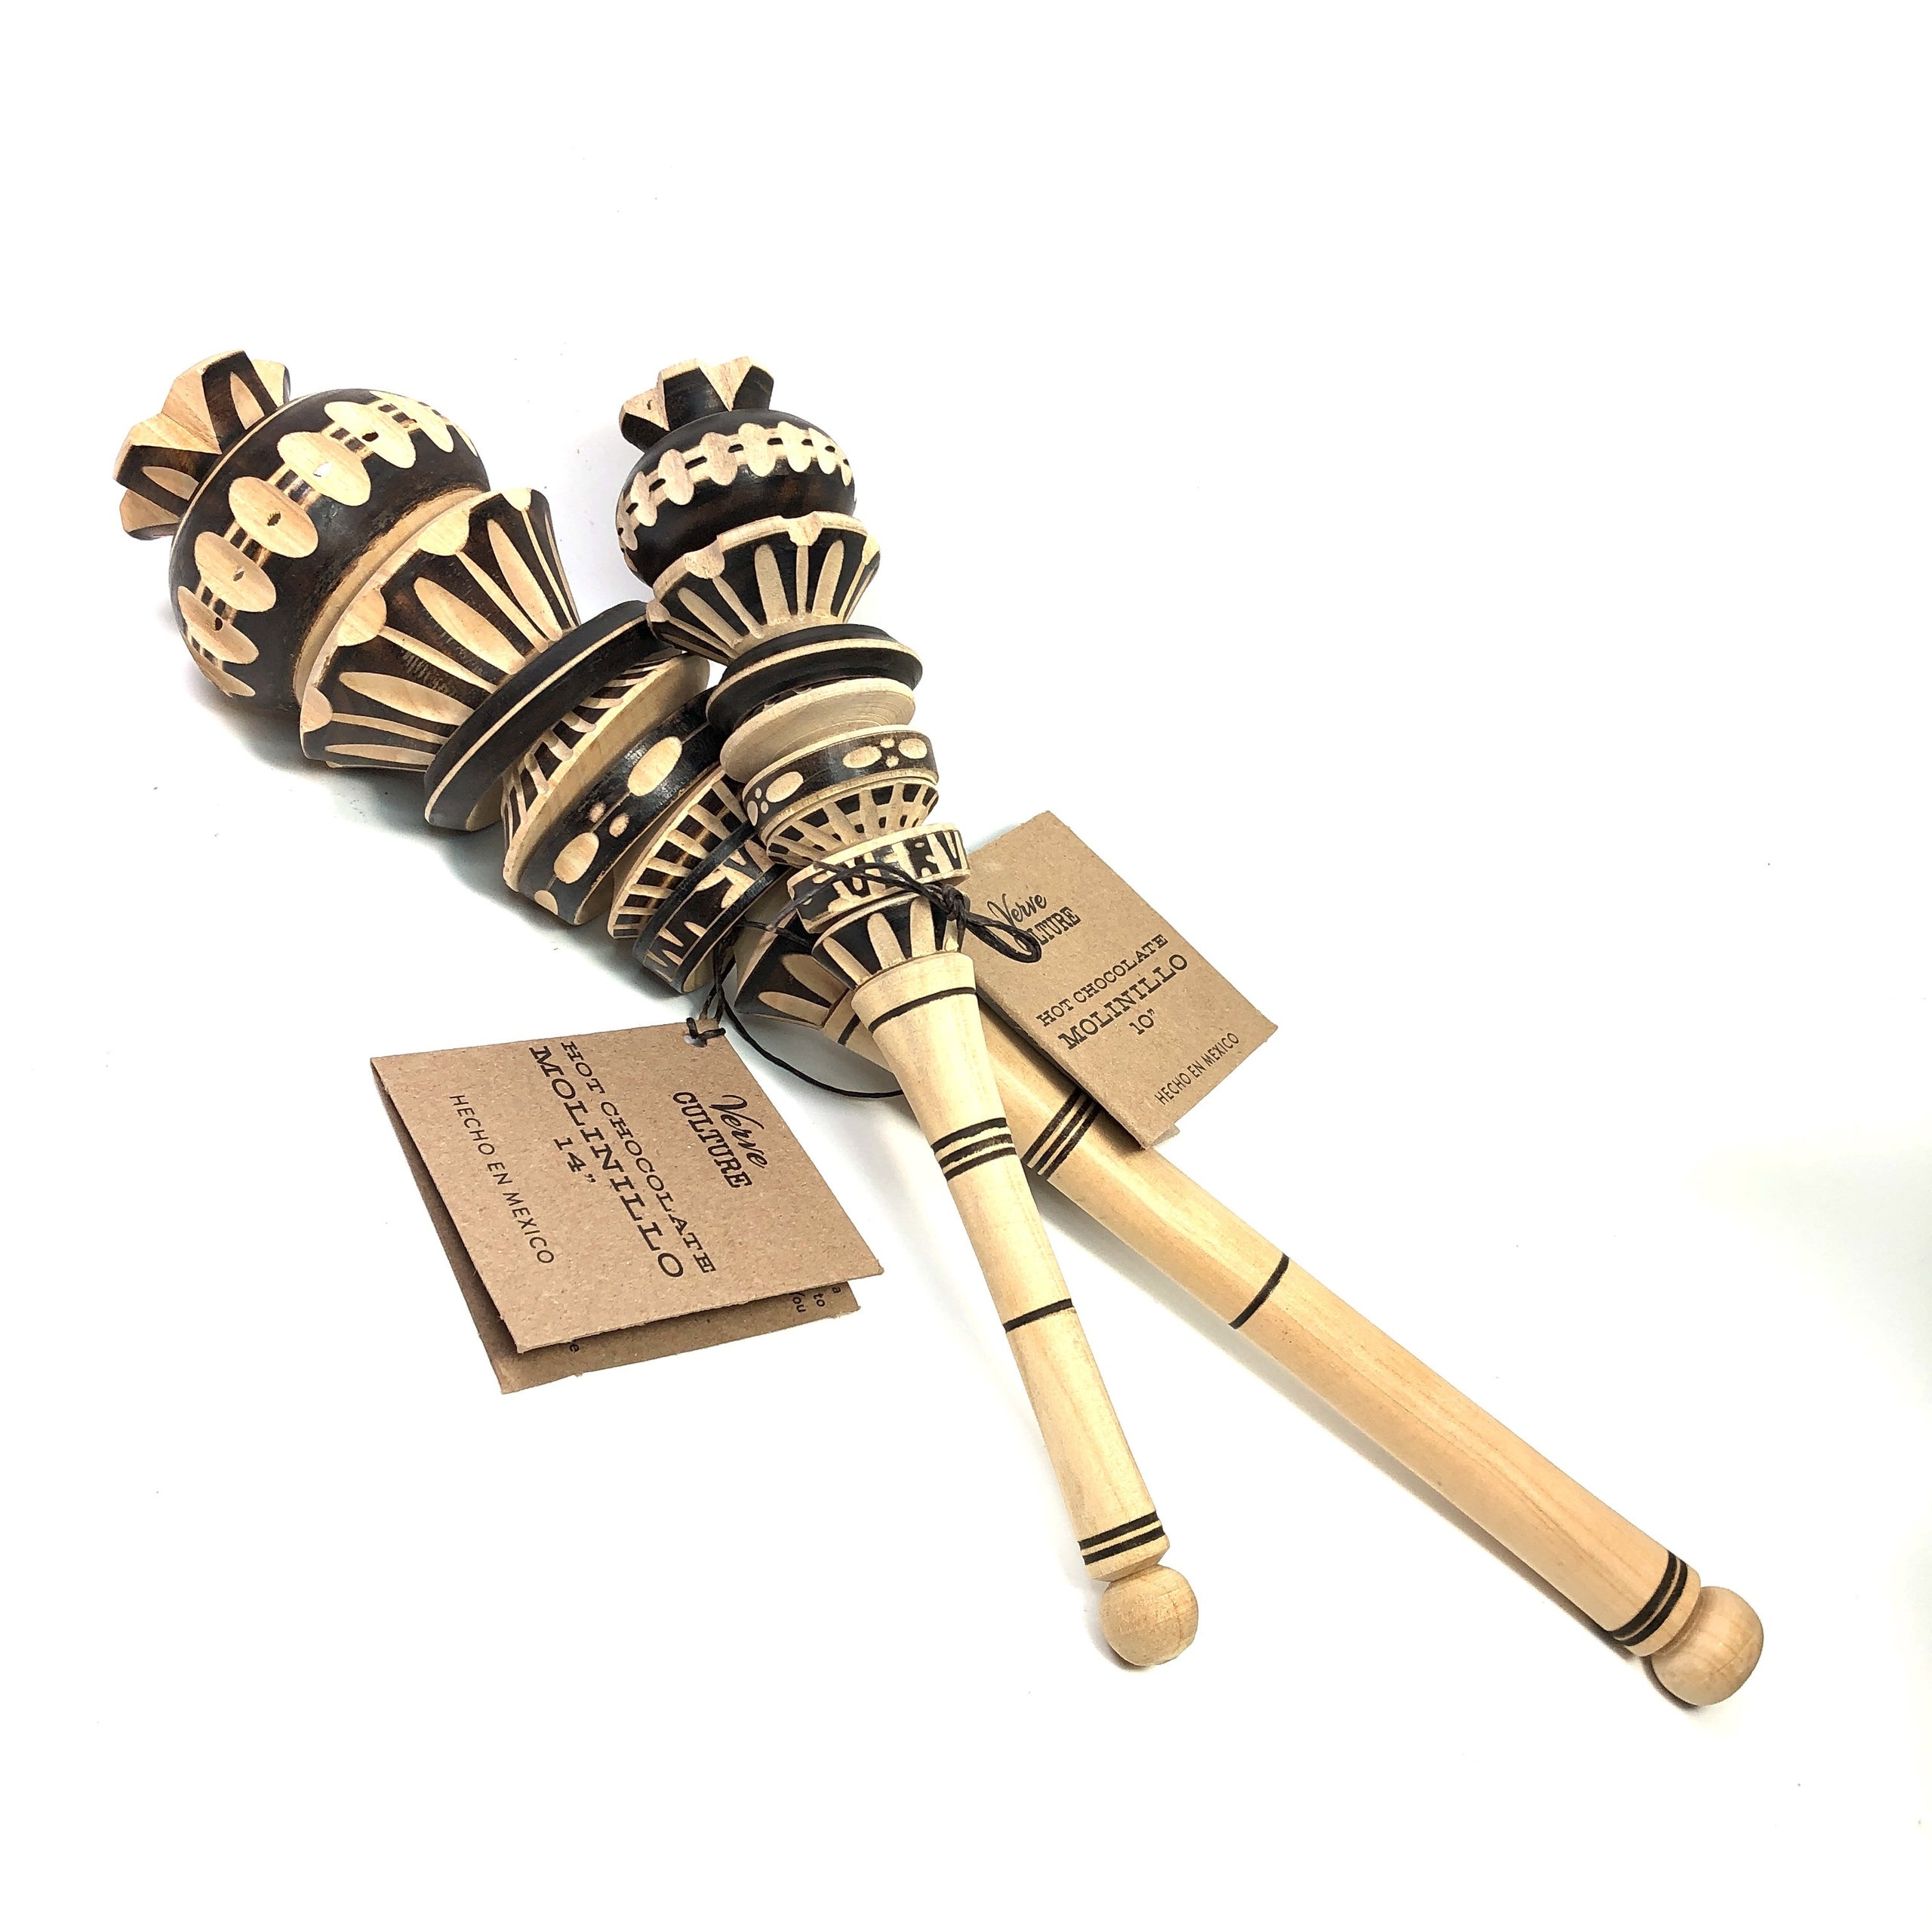 Mexican Hand Carved Hot Chocolate Tool Spoon Molinillo Wooden Whisk Froth  Large Personal Chocolate Abuelita Ibarra Party Cocina Mexican Amor -   Israel